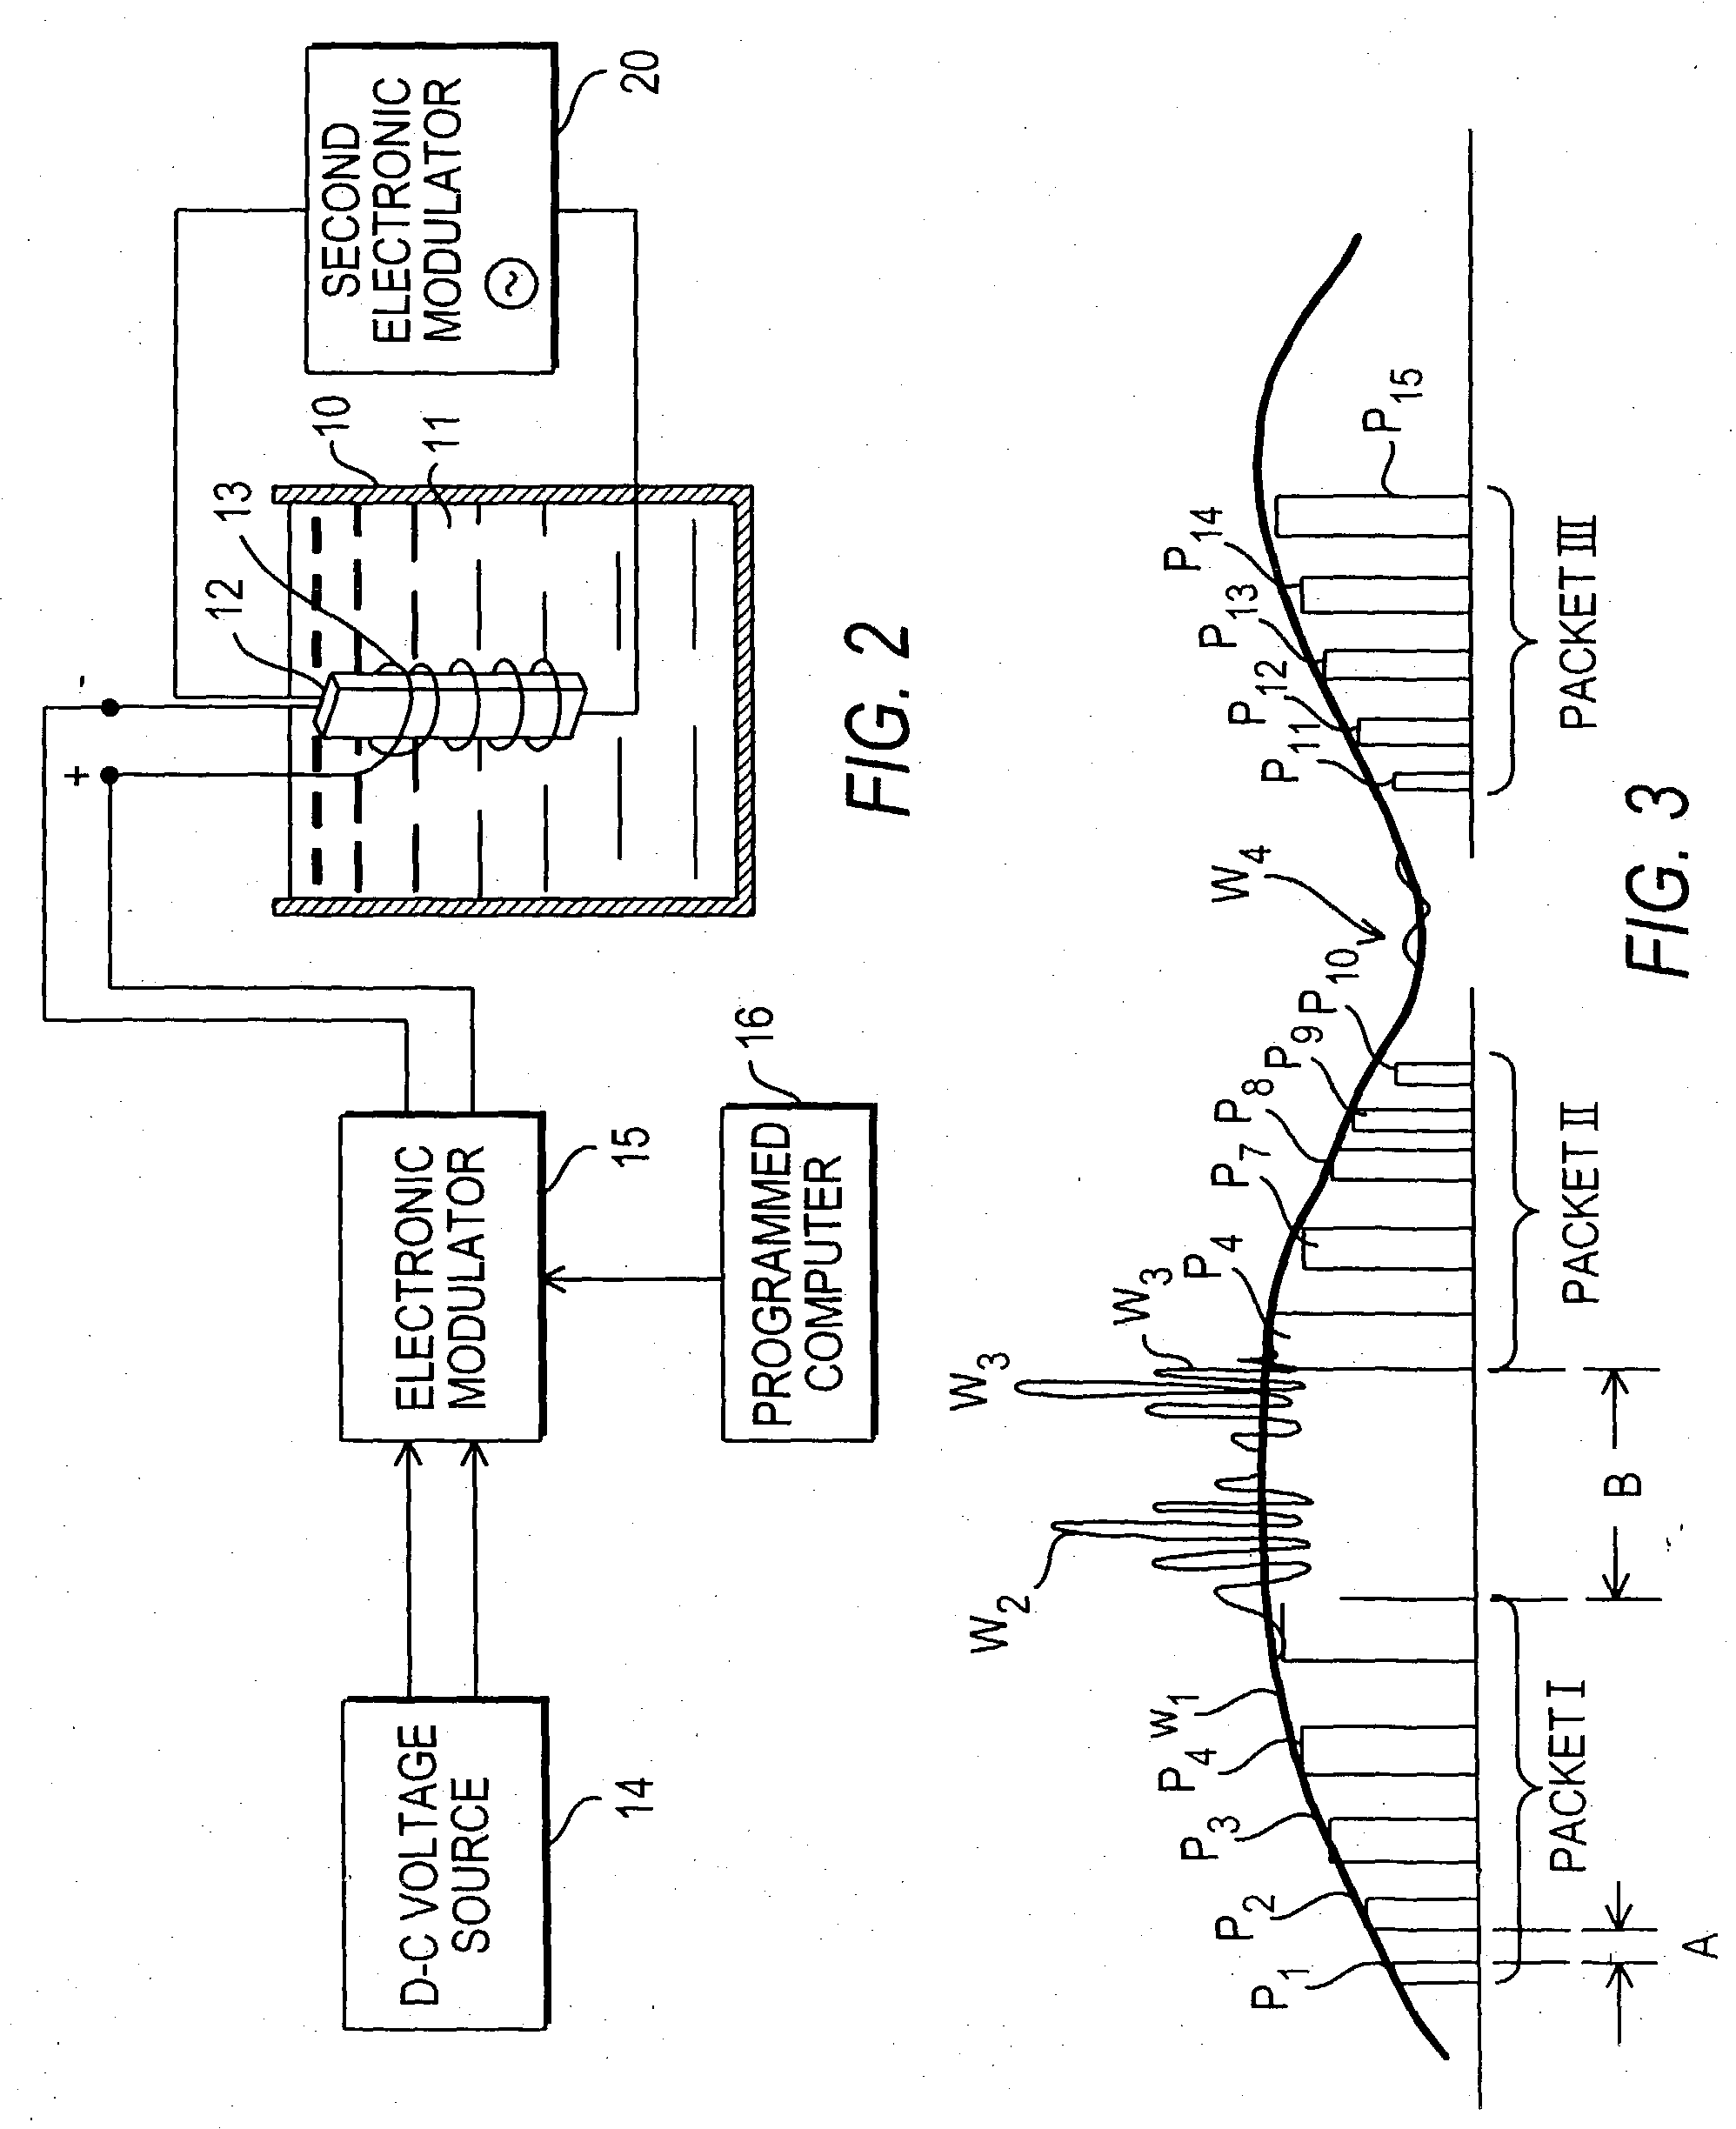 Pulsed electrolytic cell